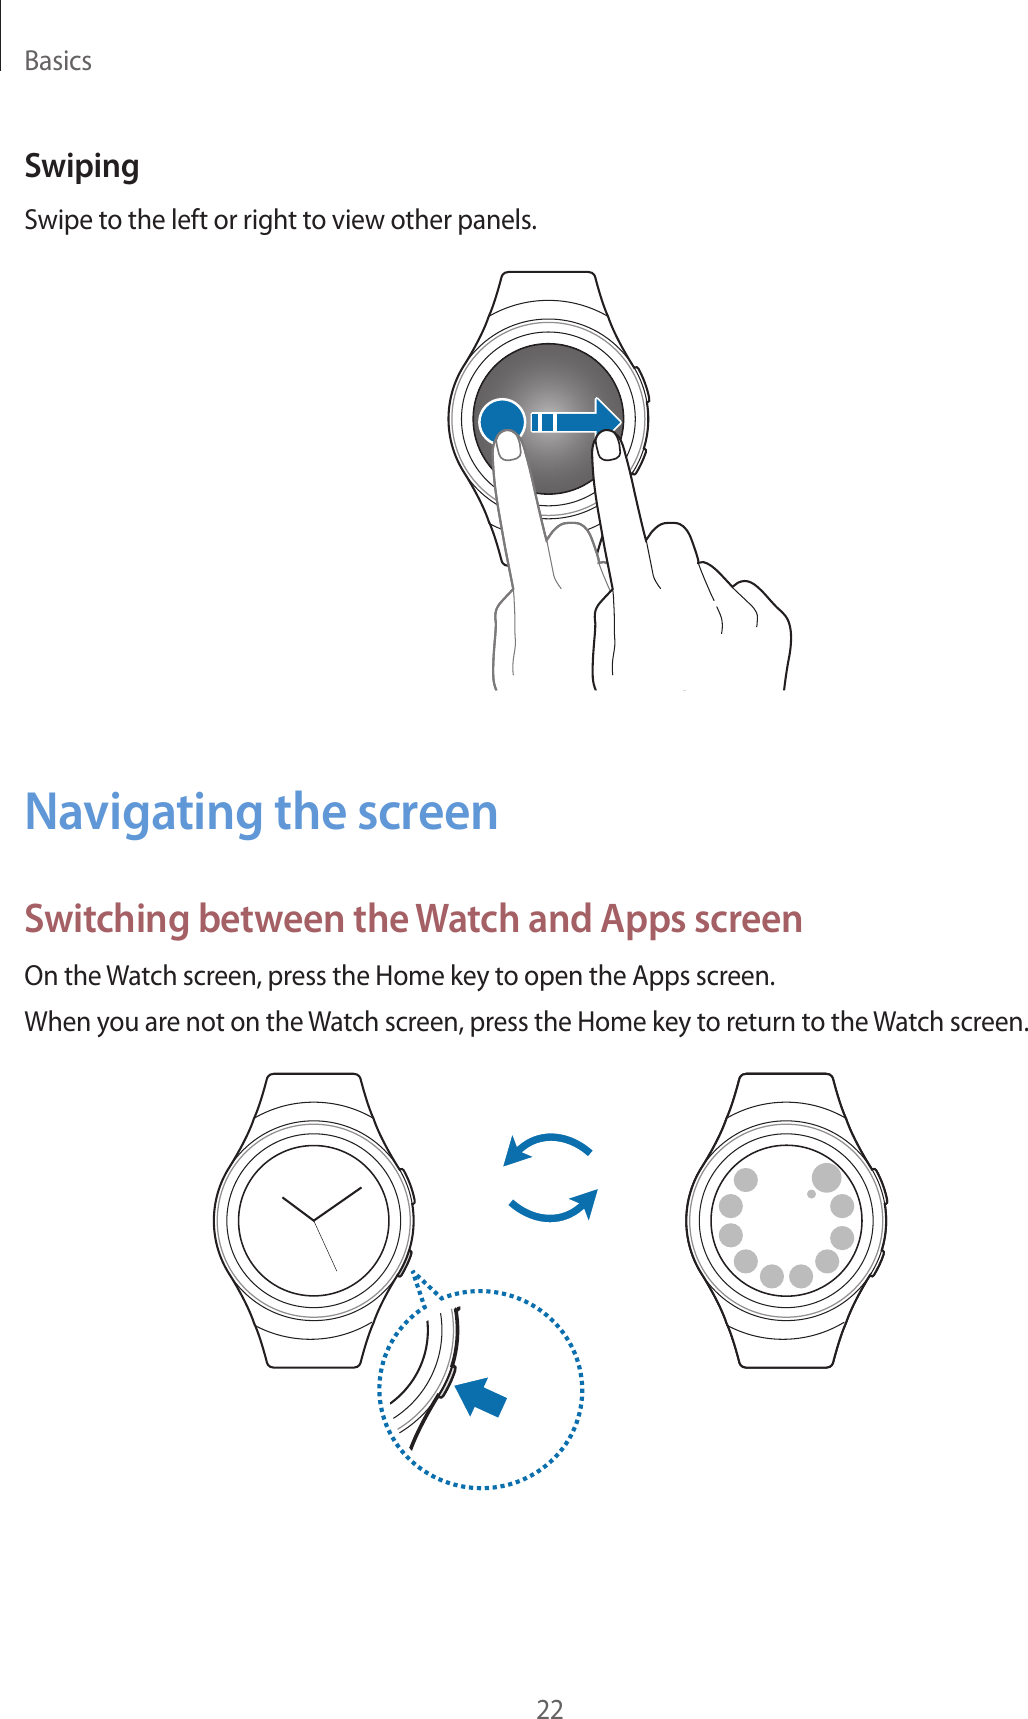 Basics22SwipingSwipe to the left or right to view other panels.Navigating the screenSwitching between the Watch and Apps screenOn the Watch screen, press the Home key to open the Apps screen.When you are not on the Watch screen, press the Home key to return to the Watch screen.